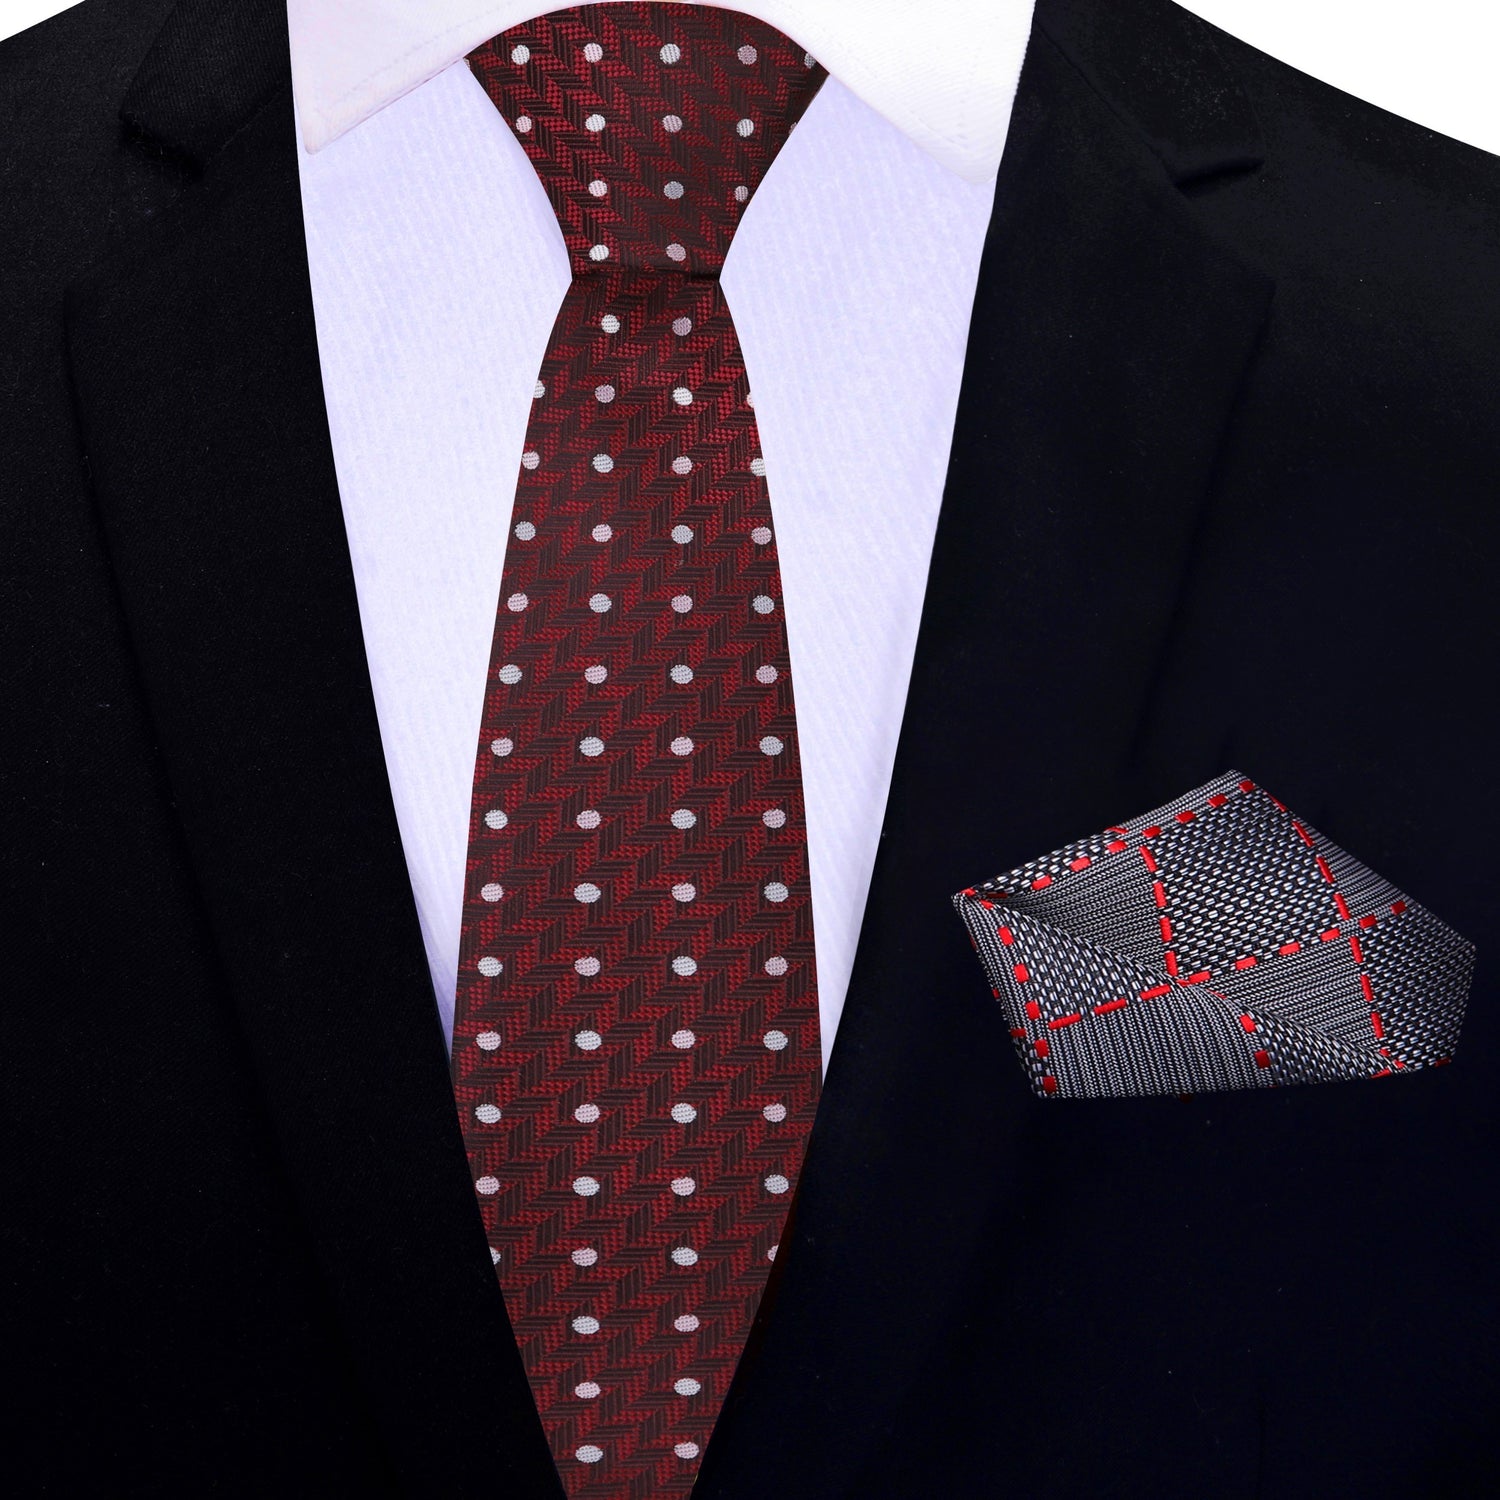 Thin Tie: Deep Red Herringbone with Dots Silk Necktie and Accenting Grey, Black Red Geometric Square